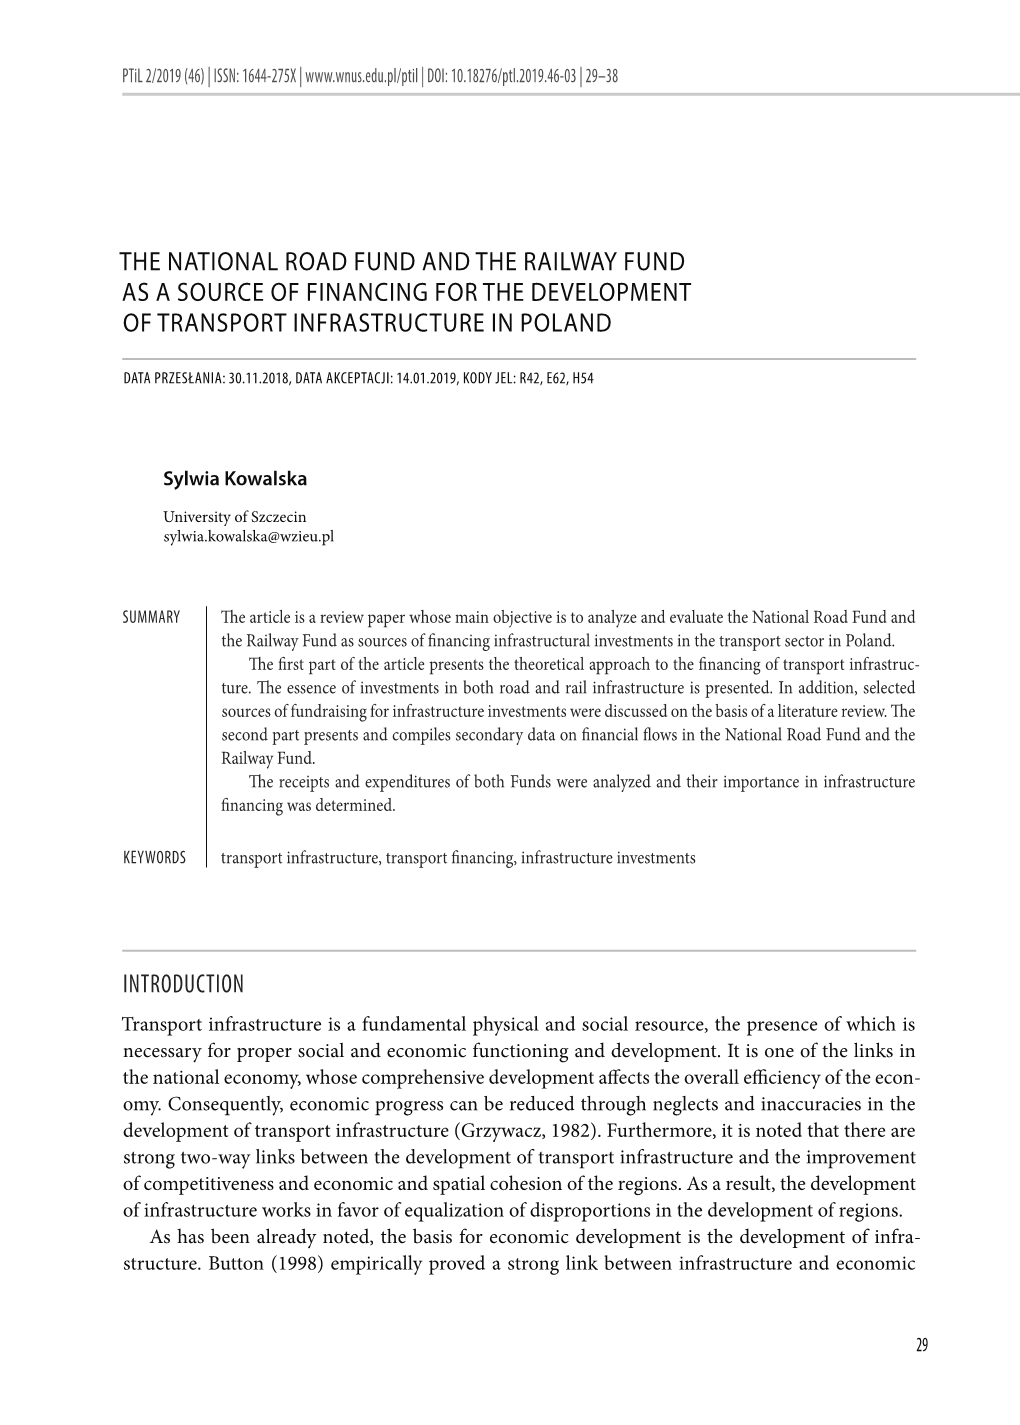 The National Road Fund and the Railway Fund As a Source of Financing for the Development of Transport Infrastructure in Poland